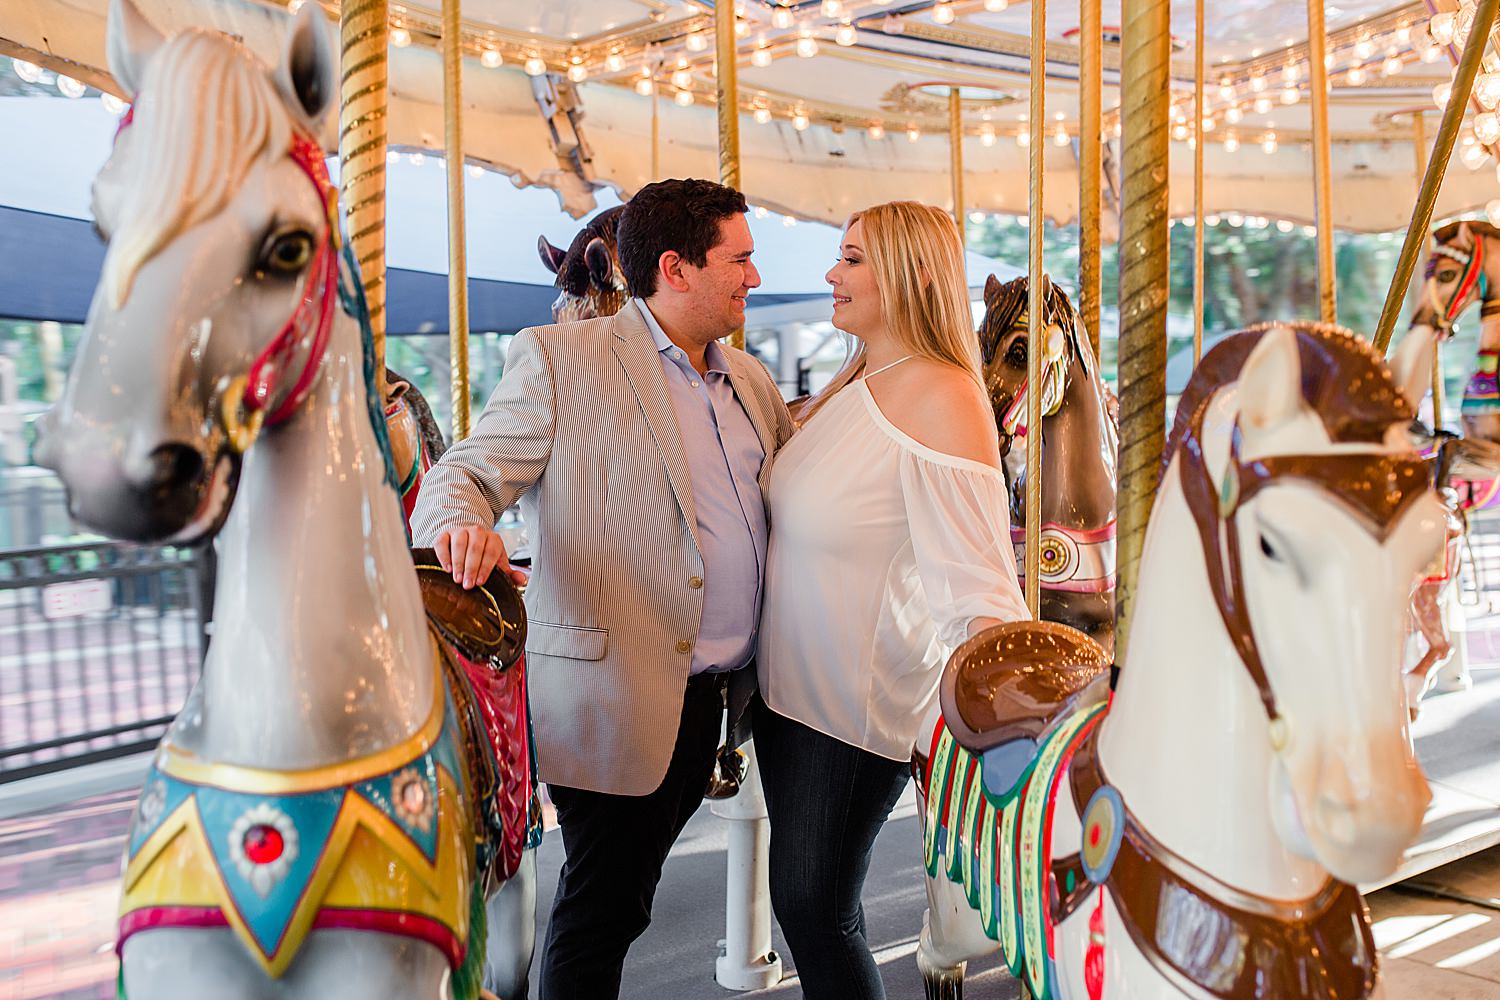 Couple smiles at each other in between horses on a carousel ride